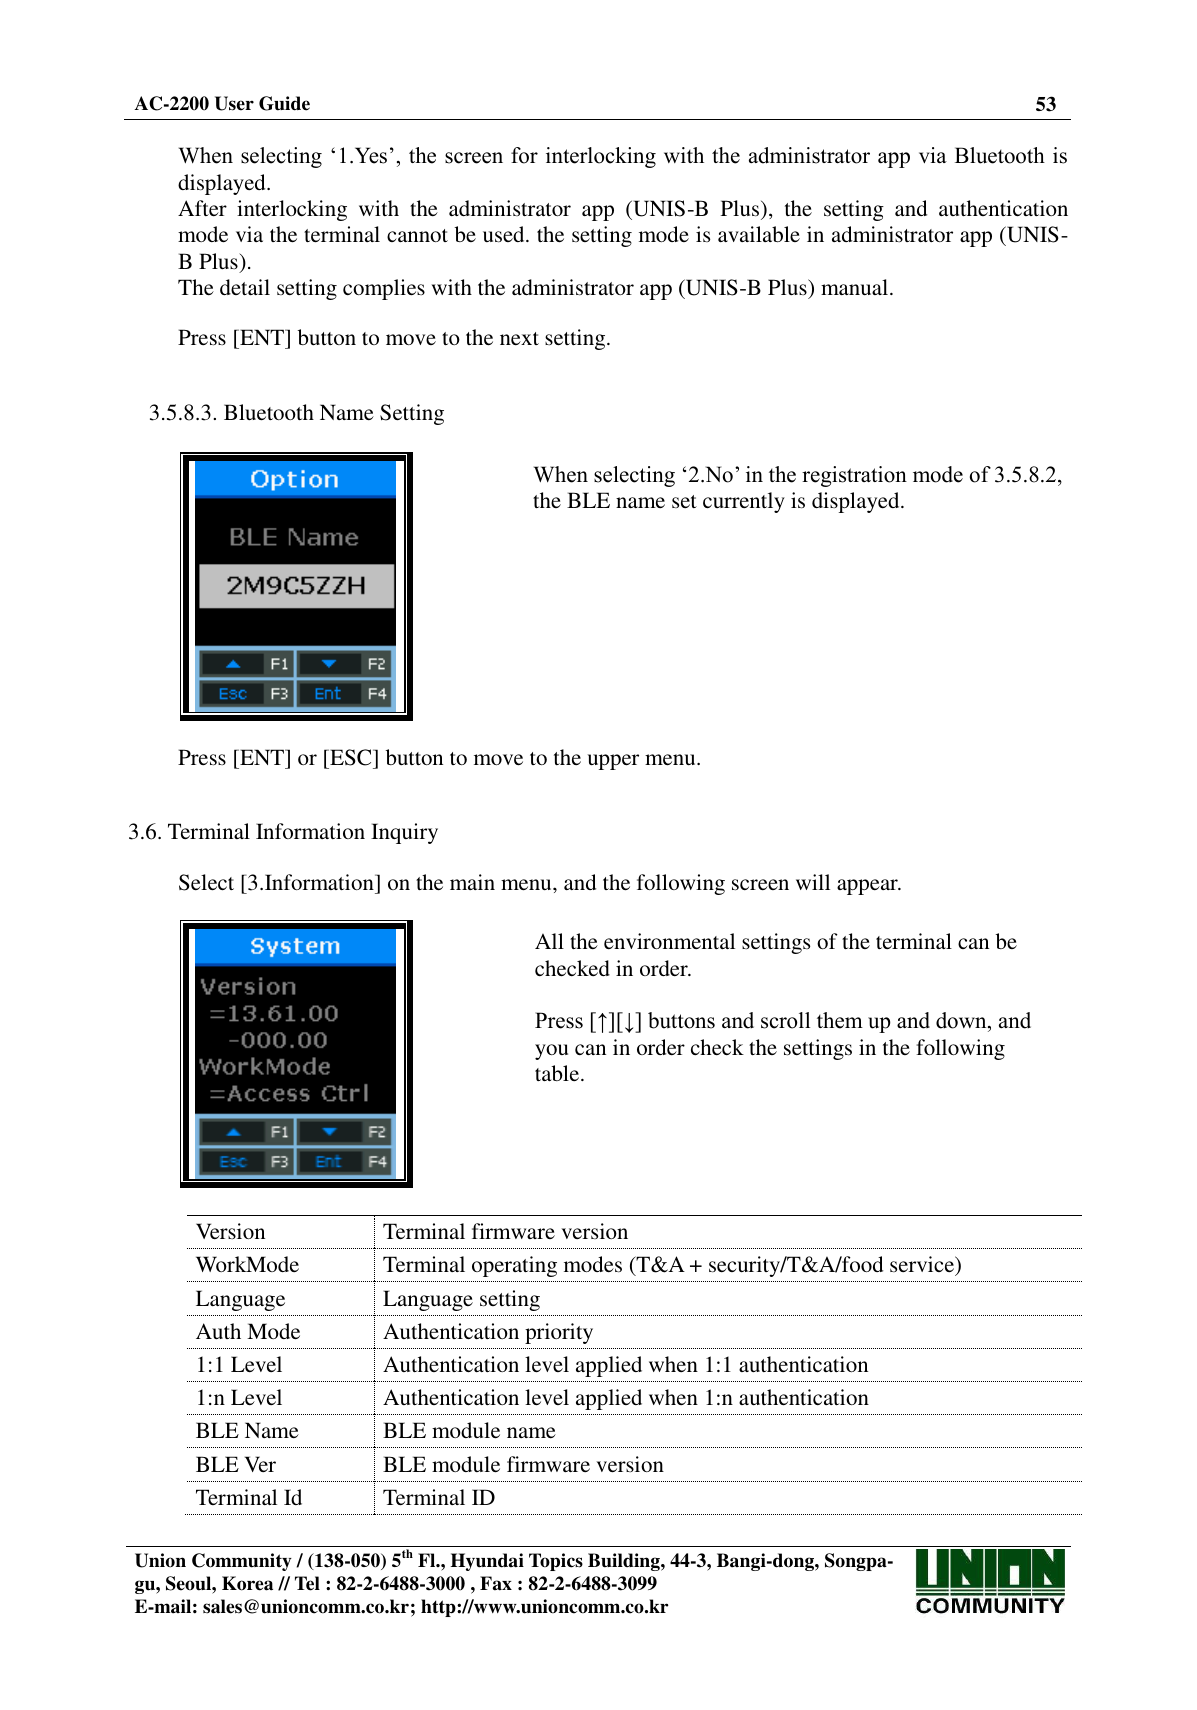  AC-2200 User Guide 53   Union Community / (138-050) 5th Fl., Hyundai Topics Building, 44-3, Bangi-dong, Songpa-gu, Seoul, Korea // Tel : 82-2-6488-3000 , Fax : 82-2-6488-3099 E-mail: sales@unioncomm.co.kr; http://www.unioncomm.co.kr   When selecting ‘1.Yes’, the screen for interlocking with the administrator app via Bluetooth is displayed. After  interlocking  with  the  administrator  app  (UNIS-B  Plus),  the  setting  and  authentication mode via the terminal cannot be used. the setting mode is available in administrator app (UNIS-B Plus). The detail setting complies with the administrator app (UNIS-B Plus) manual.  Press [ENT] button to move to the next setting.   3.5.8.3. Bluetooth Name Setting    When selecting ‘2.No’ in the registration mode of 3.5.8.2, the BLE name set currently is displayed.   Press [ENT] or [ESC] button to move to the upper menu.   3.6. Terminal Information Inquiry  Select [3.Information] on the main menu, and the following screen will appear.    All the environmental settings of the terminal can be checked in order.  Press [↑][↓] buttons and scroll them up and down, and you can in order check the settings in the following table.  Version Terminal firmware version WorkMode Terminal operating modes (T&amp;A + security/T&amp;A/food service) Language Language setting Auth Mode Authentication priority 1:1 Level Authentication level applied when 1:1 authentication 1:n Level Authentication level applied when 1:n authentication BLE Name BLE module name BLE Ver BLE module firmware version Terminal Id Terminal ID 